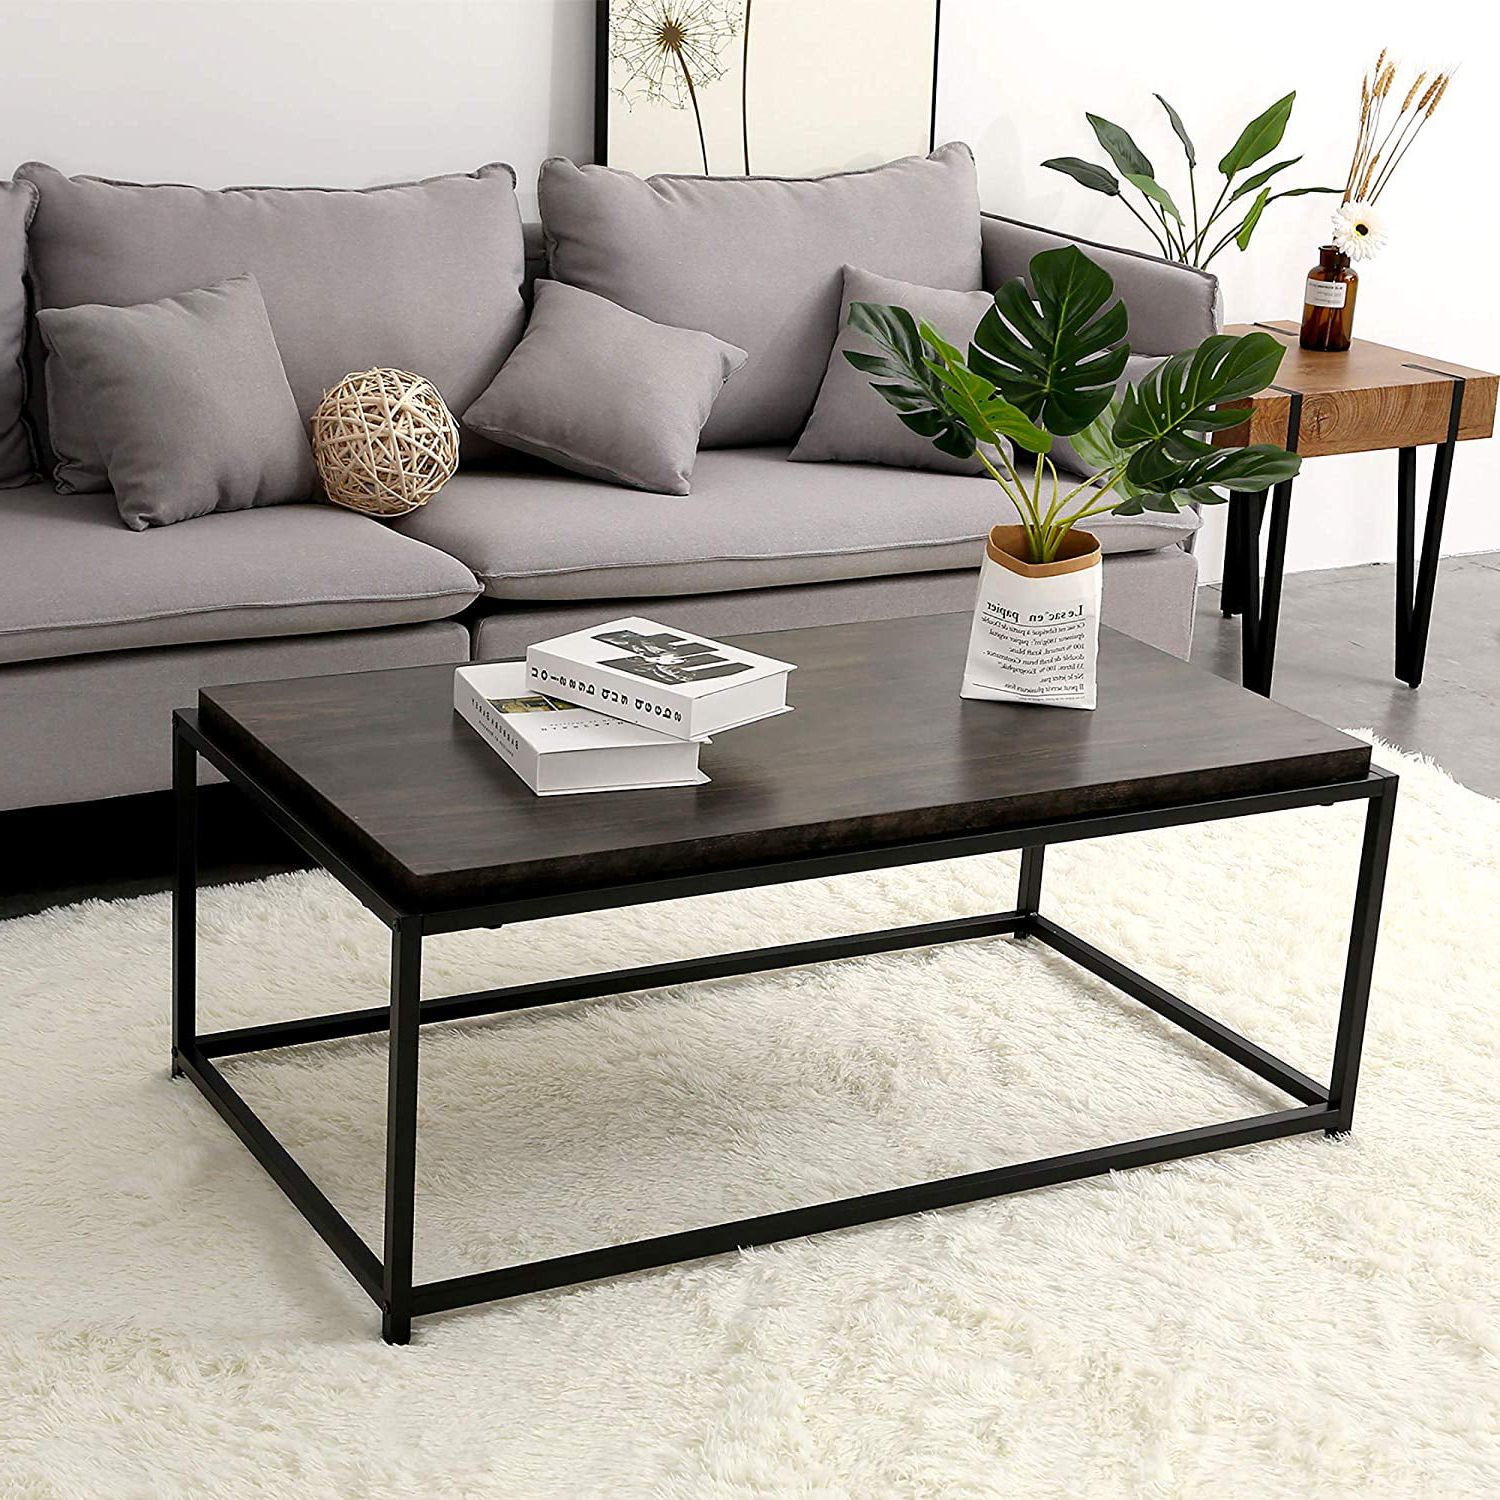 Ivinta Wood Coffee Table Modern Industrial Space Saving Couch Living Pertaining To Well Liked Espresso Wood Finish Coffee Tables (View 5 of 15)